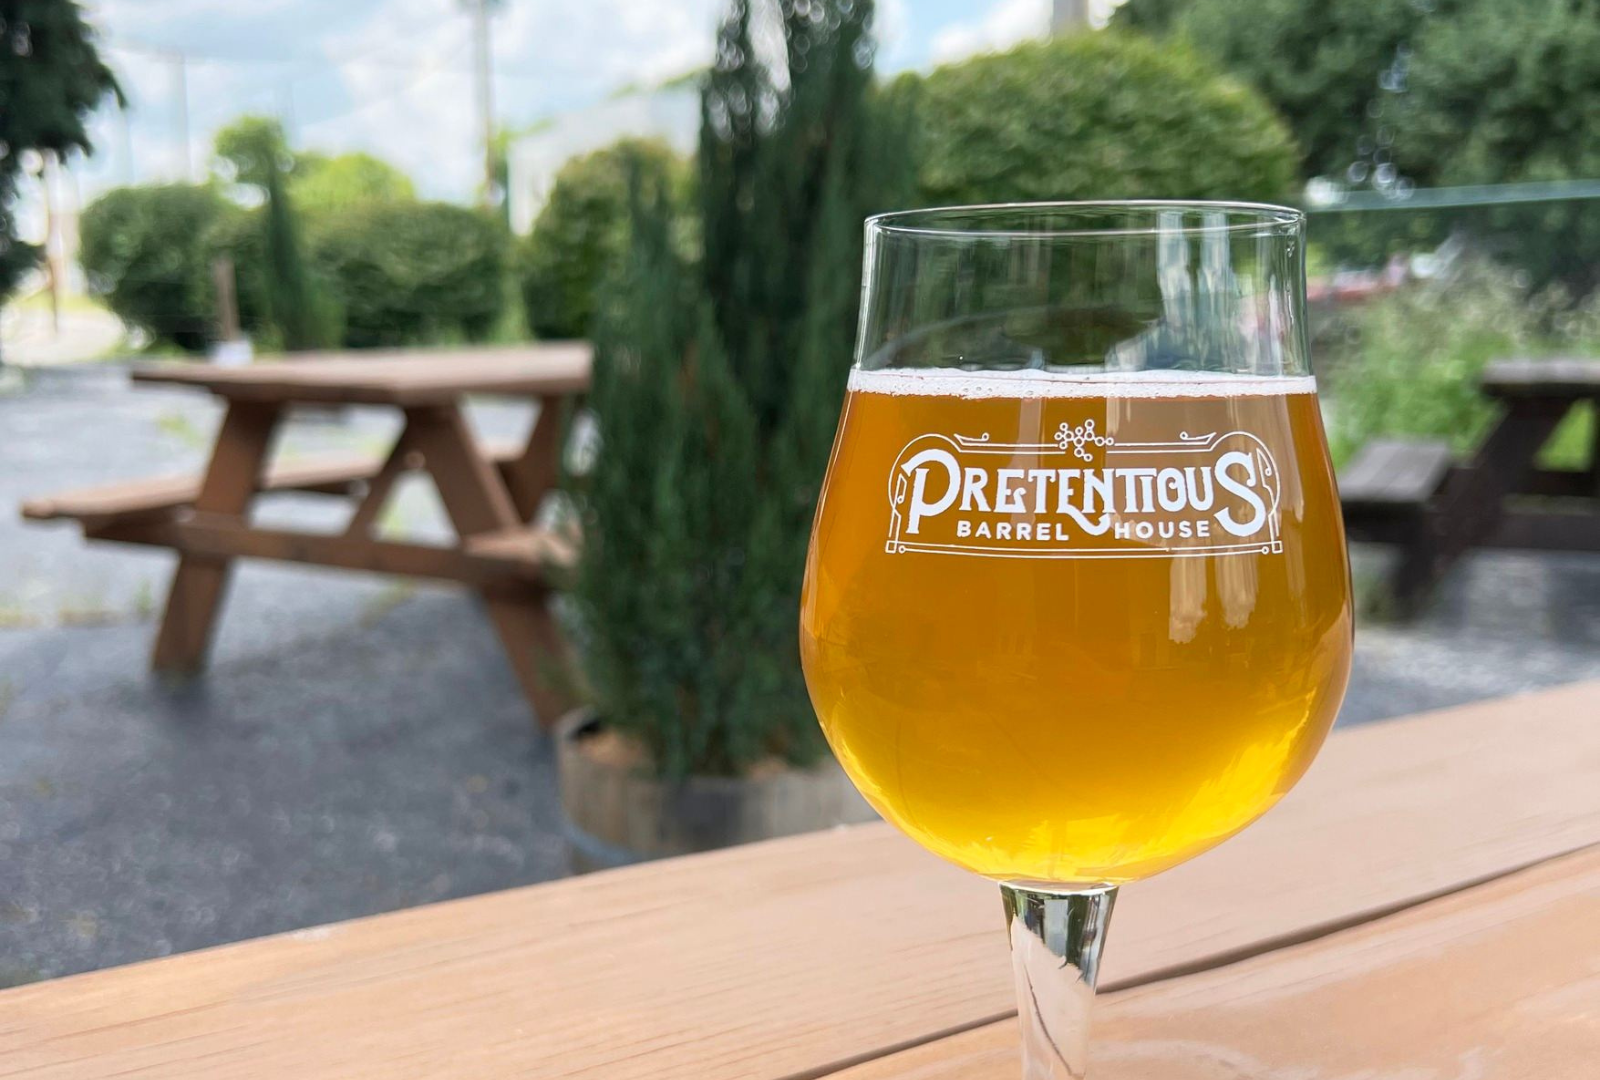 Pretentious Barrel House Beer in Glass Outdoors